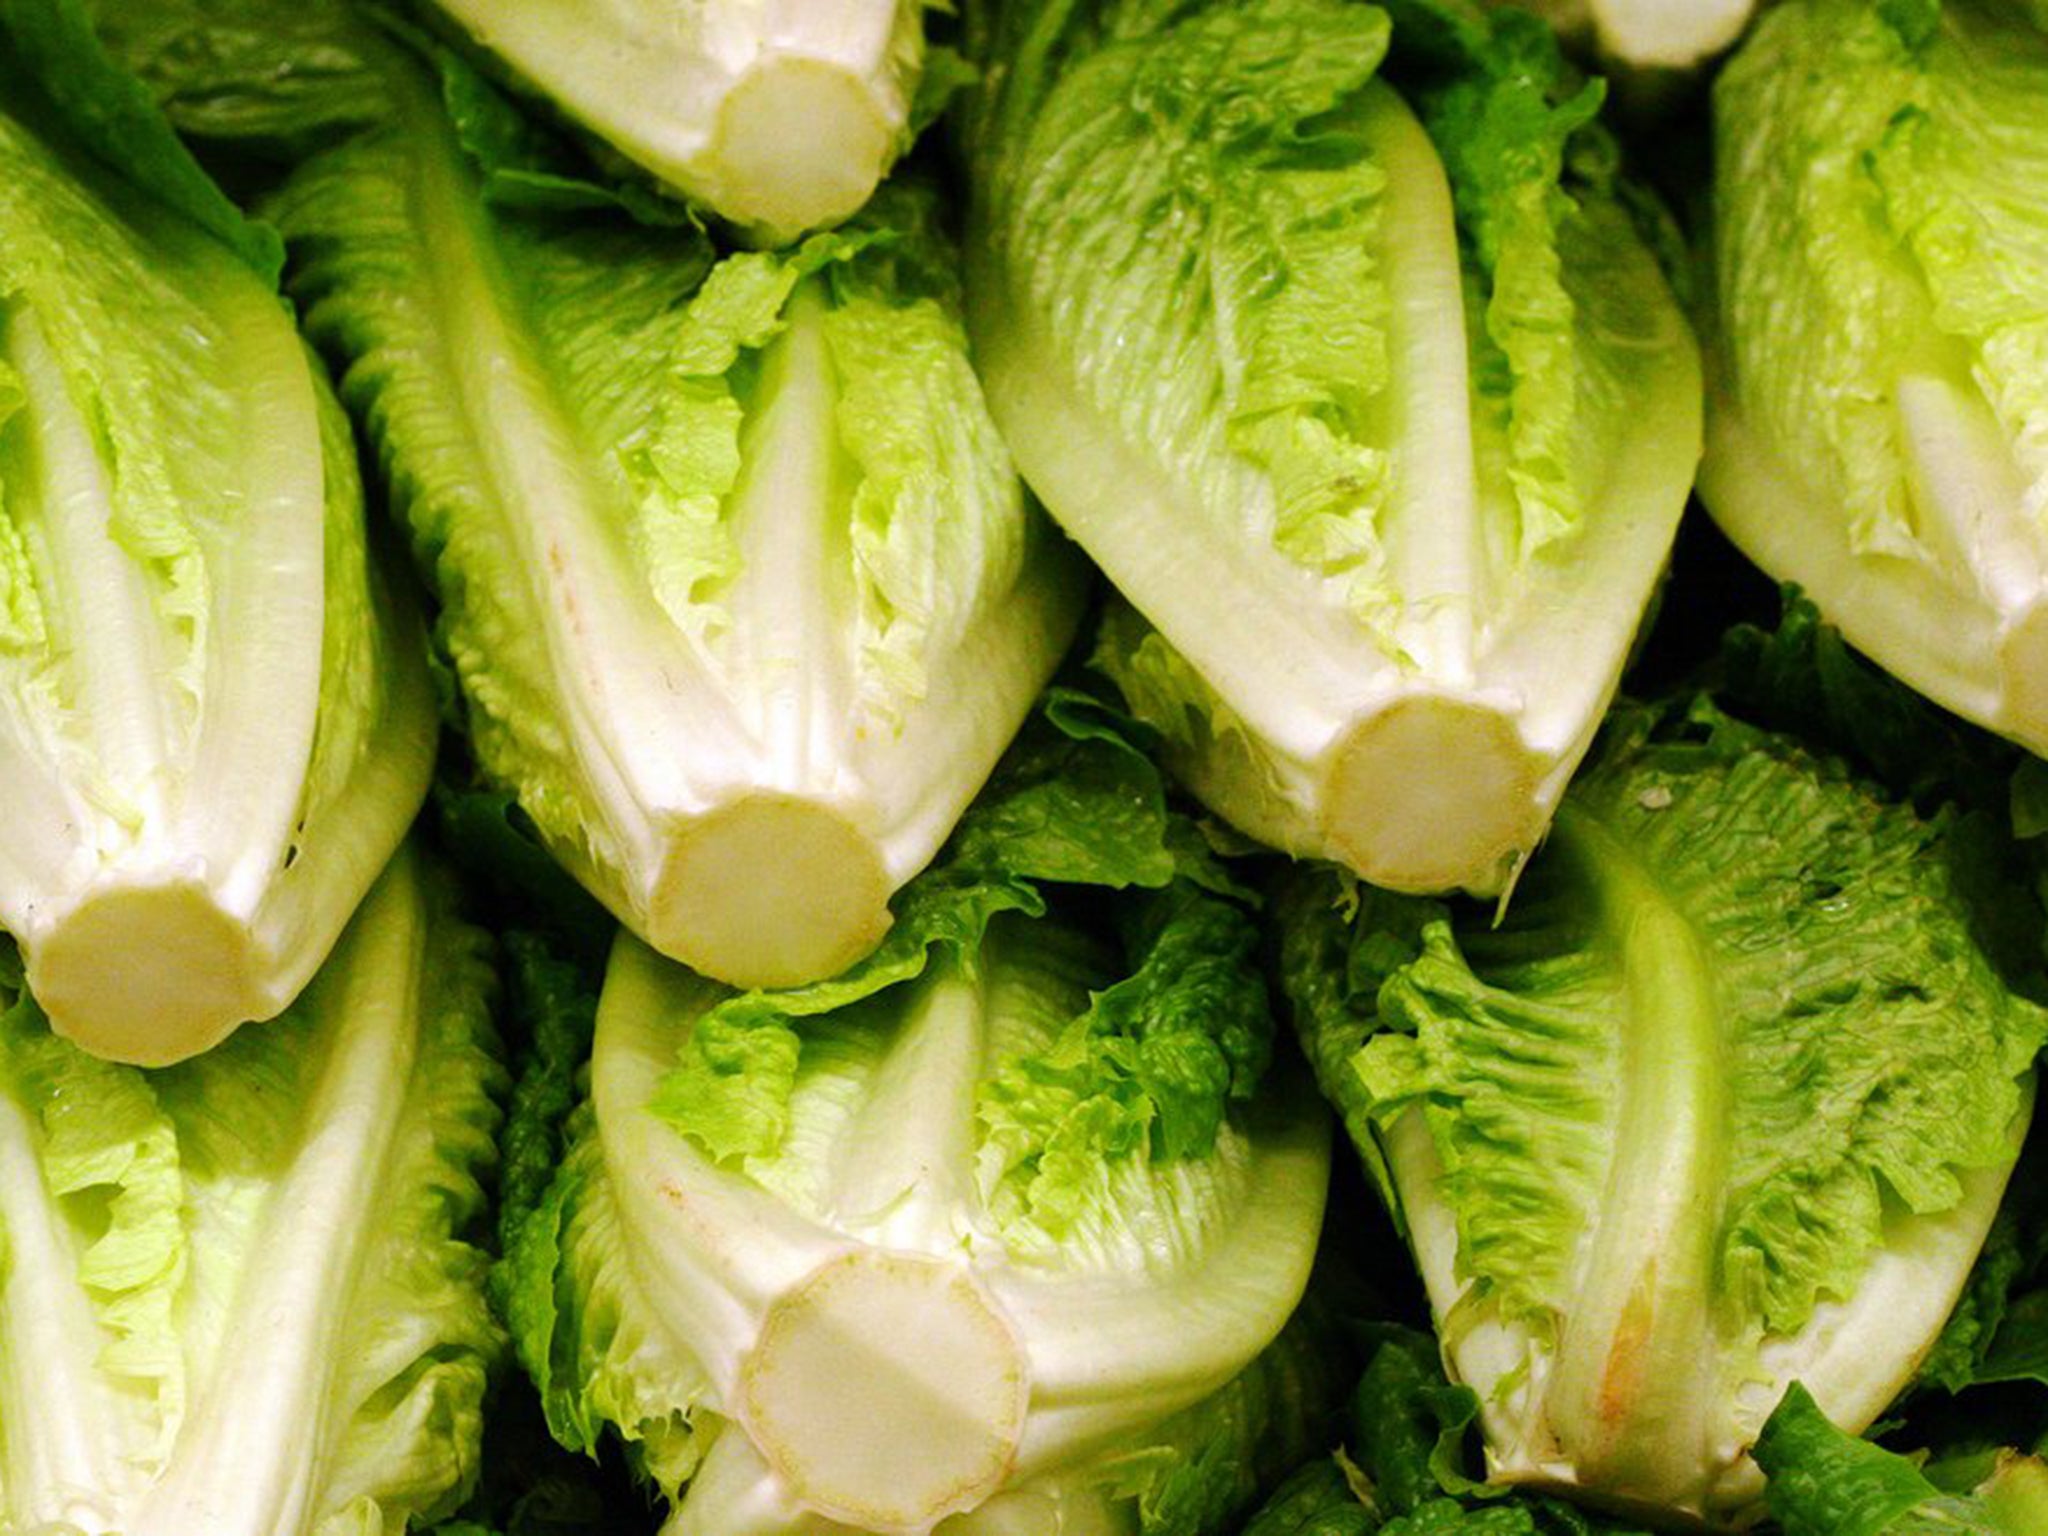 Romaine ranked among the top 10 'powerhouse foods,' by the CDC, which are classified based on their associations with reduced risk for chronic diseases